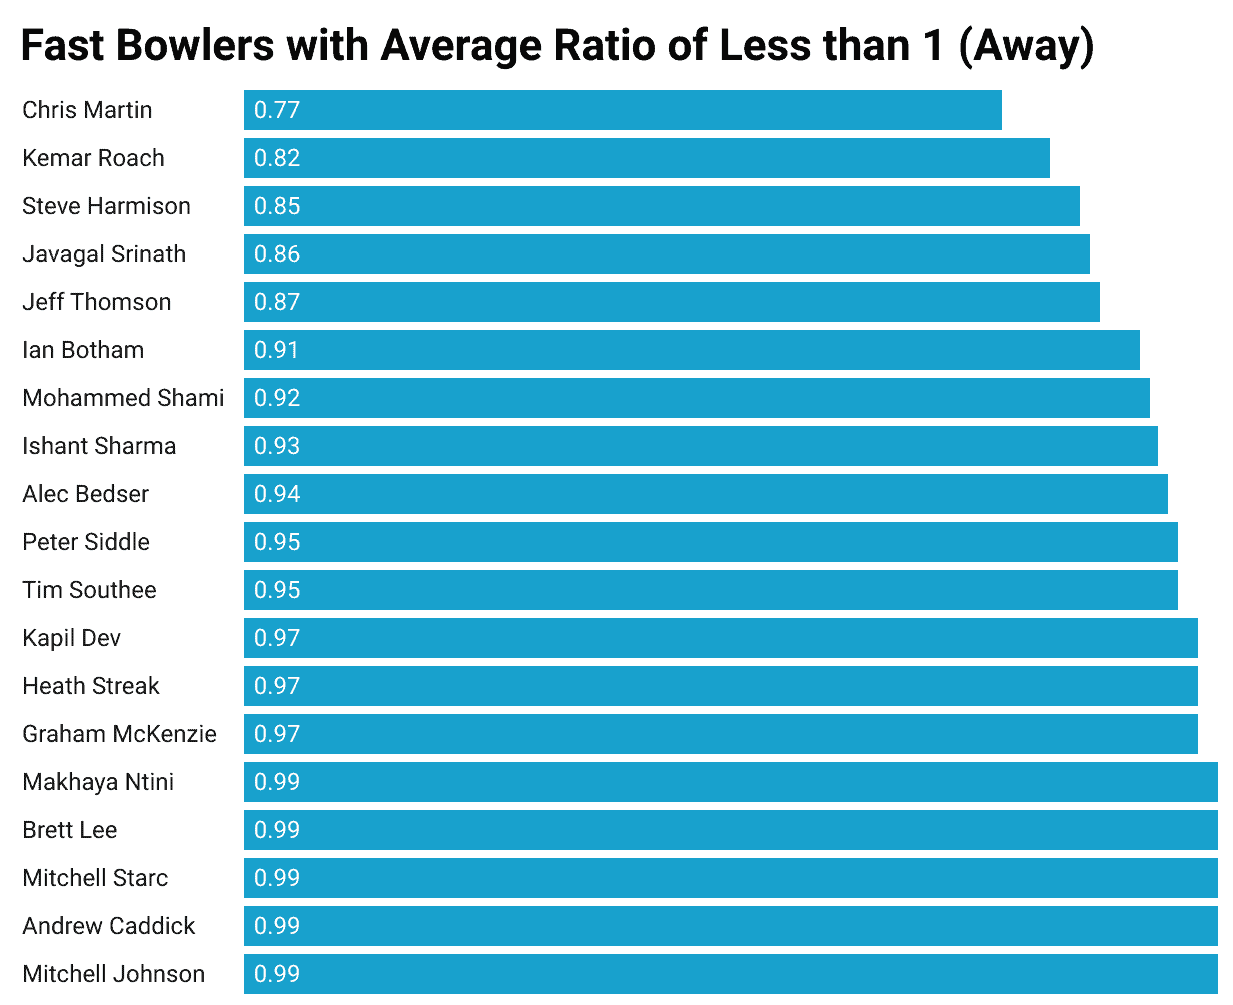 Fast Bowlers with Away Average Ratio of Less than 1